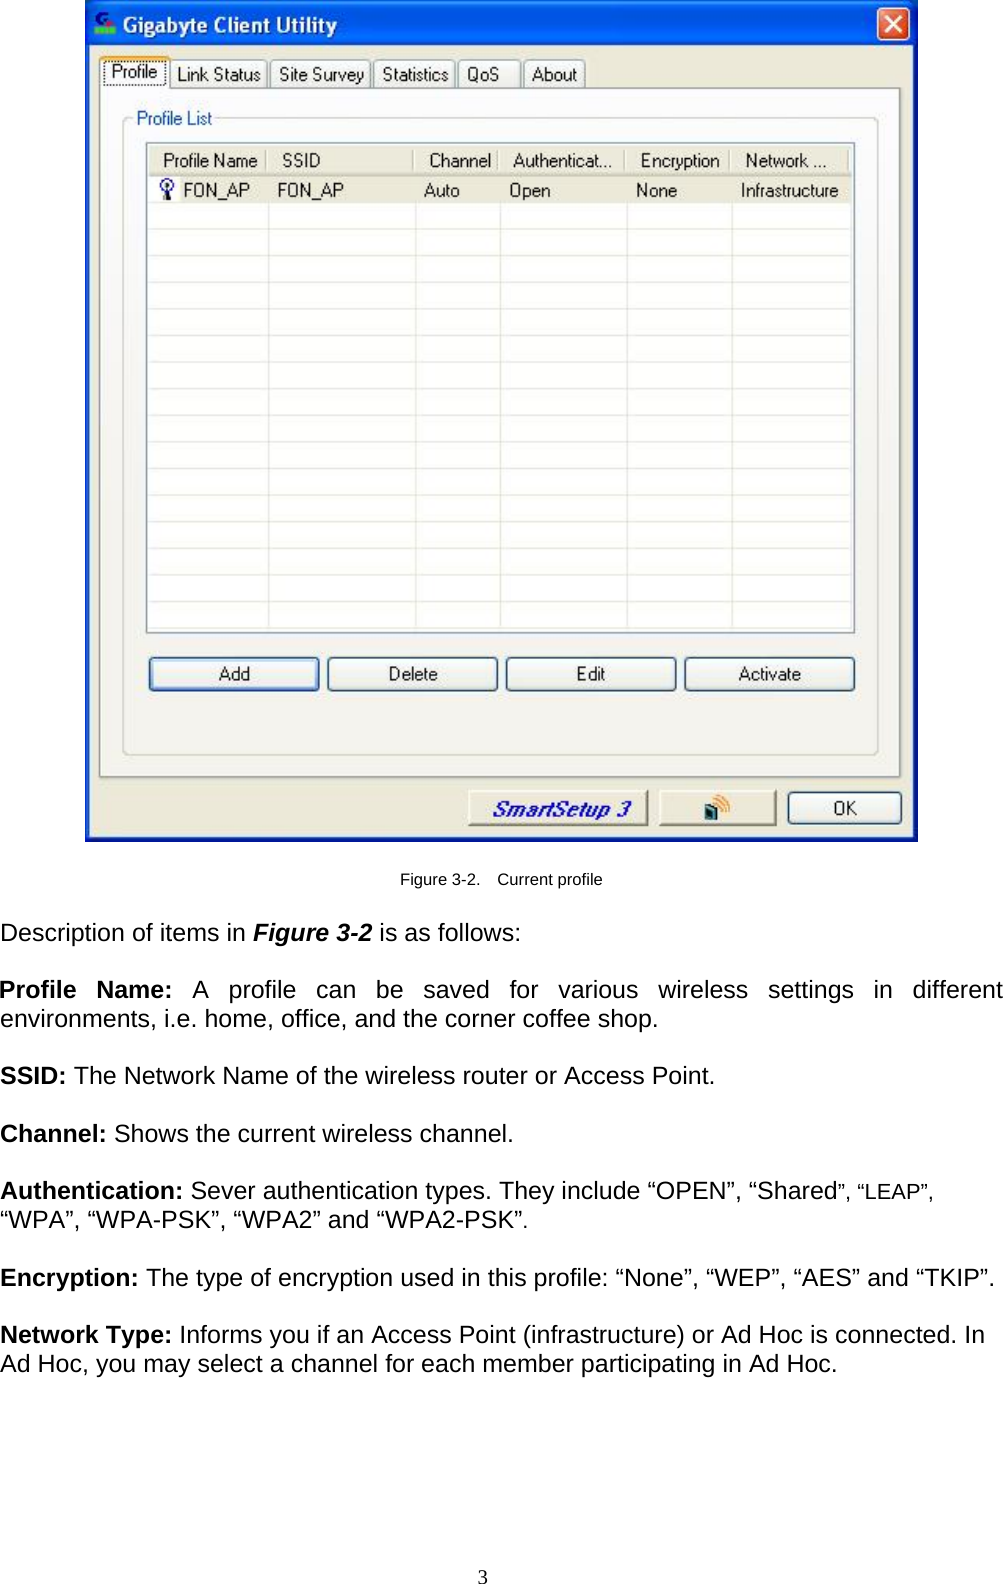 3     Figure 3-2.  Current profile  Description of items in Figure 3-2 is as follows:  Profile Name: A profile can be saved for various wireless settings in different environments, i.e. home, office, and the corner coffee shop.  SSID: The Network Name of the wireless router or Access Point.  Channel: Shows the current wireless channel.  Authentication: Sever authentication types. They include “OPEN”, “Shared”, “LEAP”, “WPA”, “WPA-PSK”, “WPA2” and “WPA2-PSK”.  Encryption: The type of encryption used in this profile: “None”, “WEP”, “AES” and “TKIP”.  Network Type: Informs you if an Access Point (infrastructure) or Ad Hoc is connected. In Ad Hoc, you may select a channel for each member participating in Ad Hoc.    